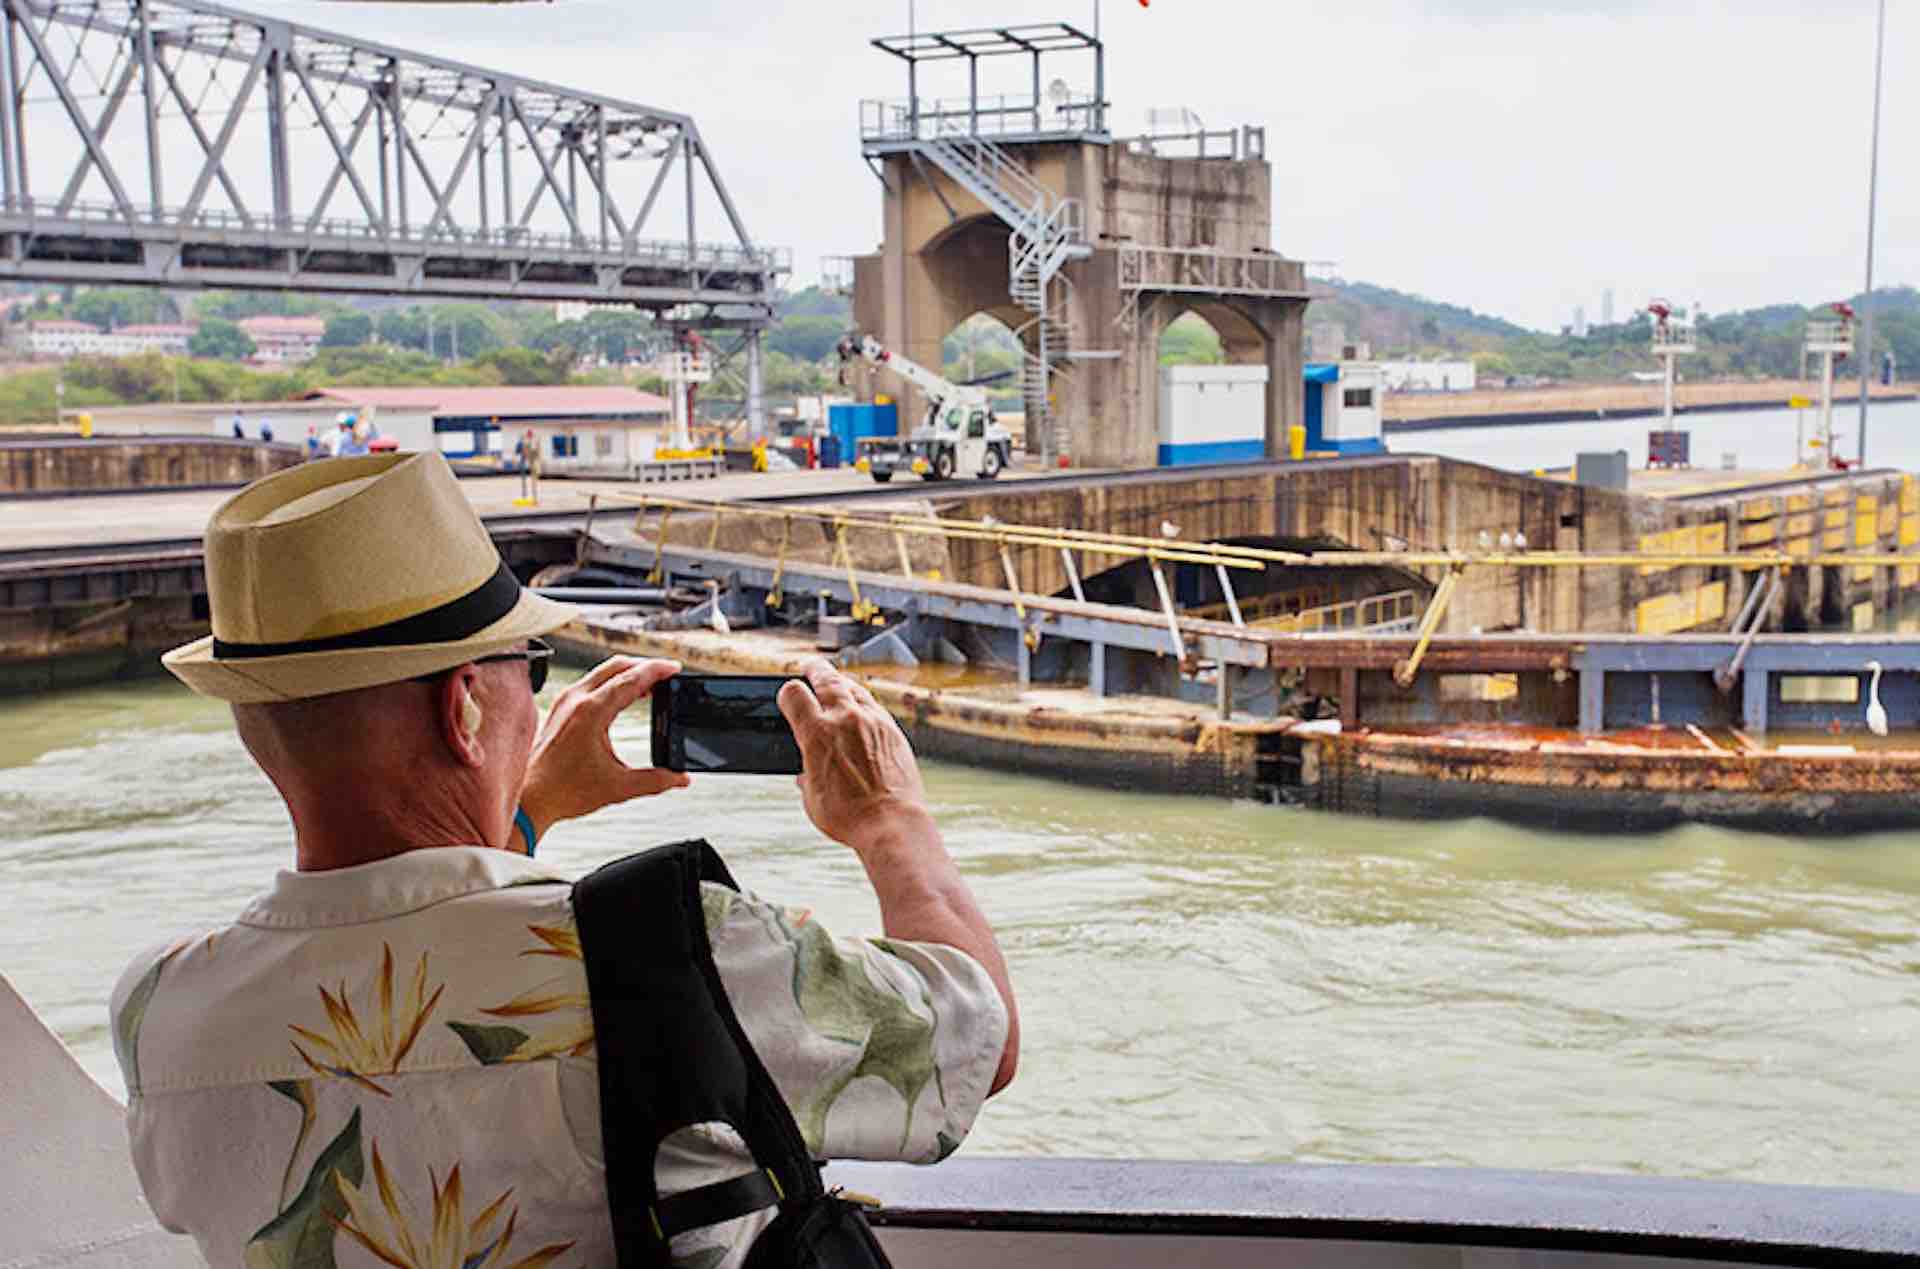 Pacific Queen Panama Canal Cruise in lock guest taking photo